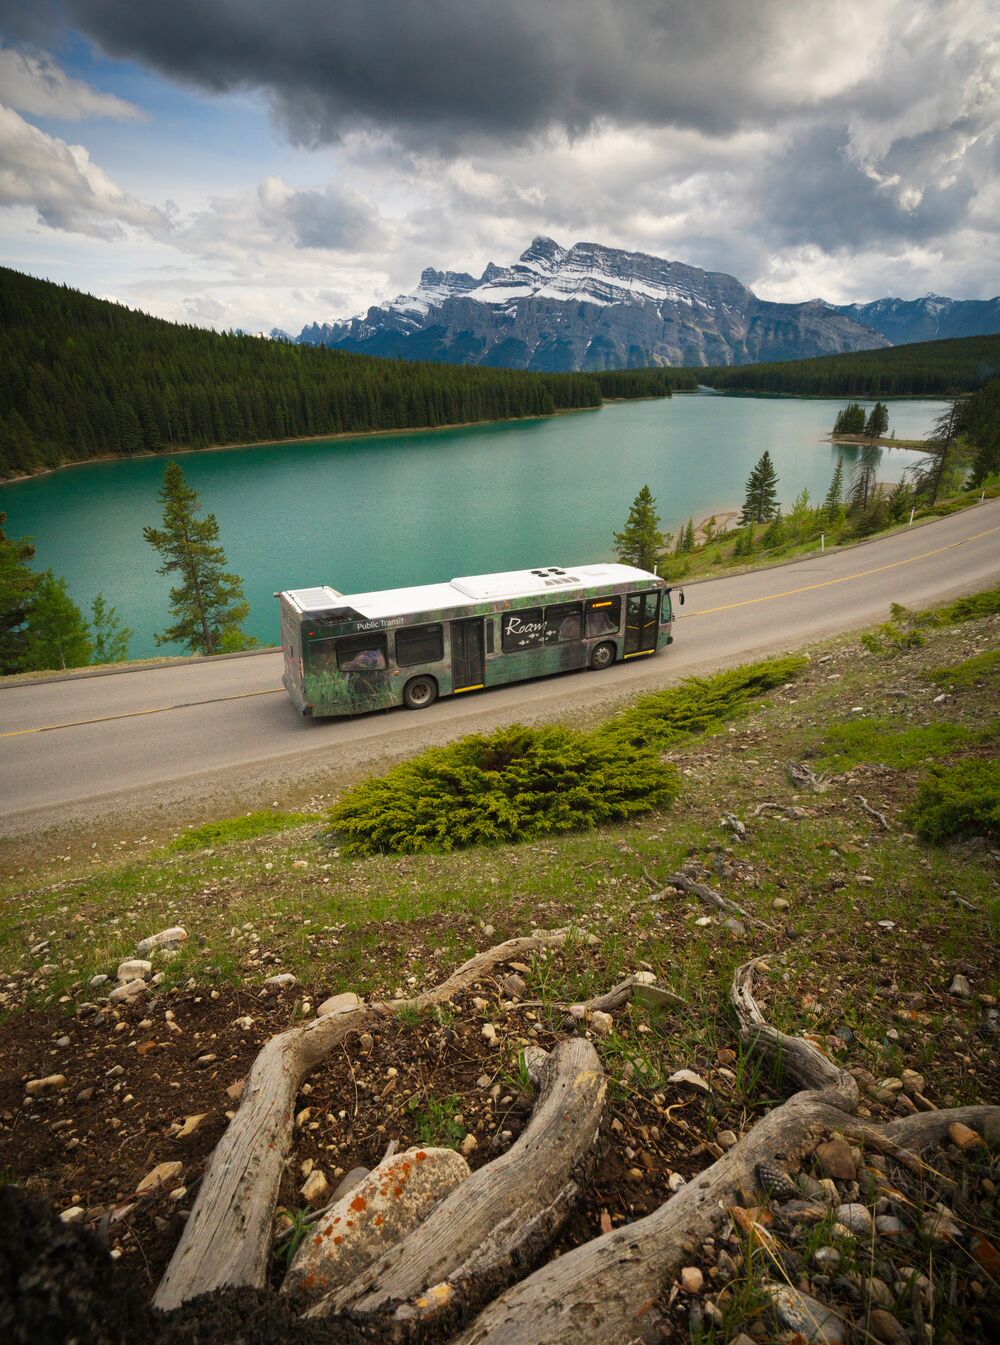 A Roam Transit bus drives on the Minnewanka Loop in Banff National Park. There are tree roots in the foreground of the picture, which was taken from the side of a hill looking down towards Two Jack Lake. Mount Rundle sits in the distance with a cloudy blue-sky above it.